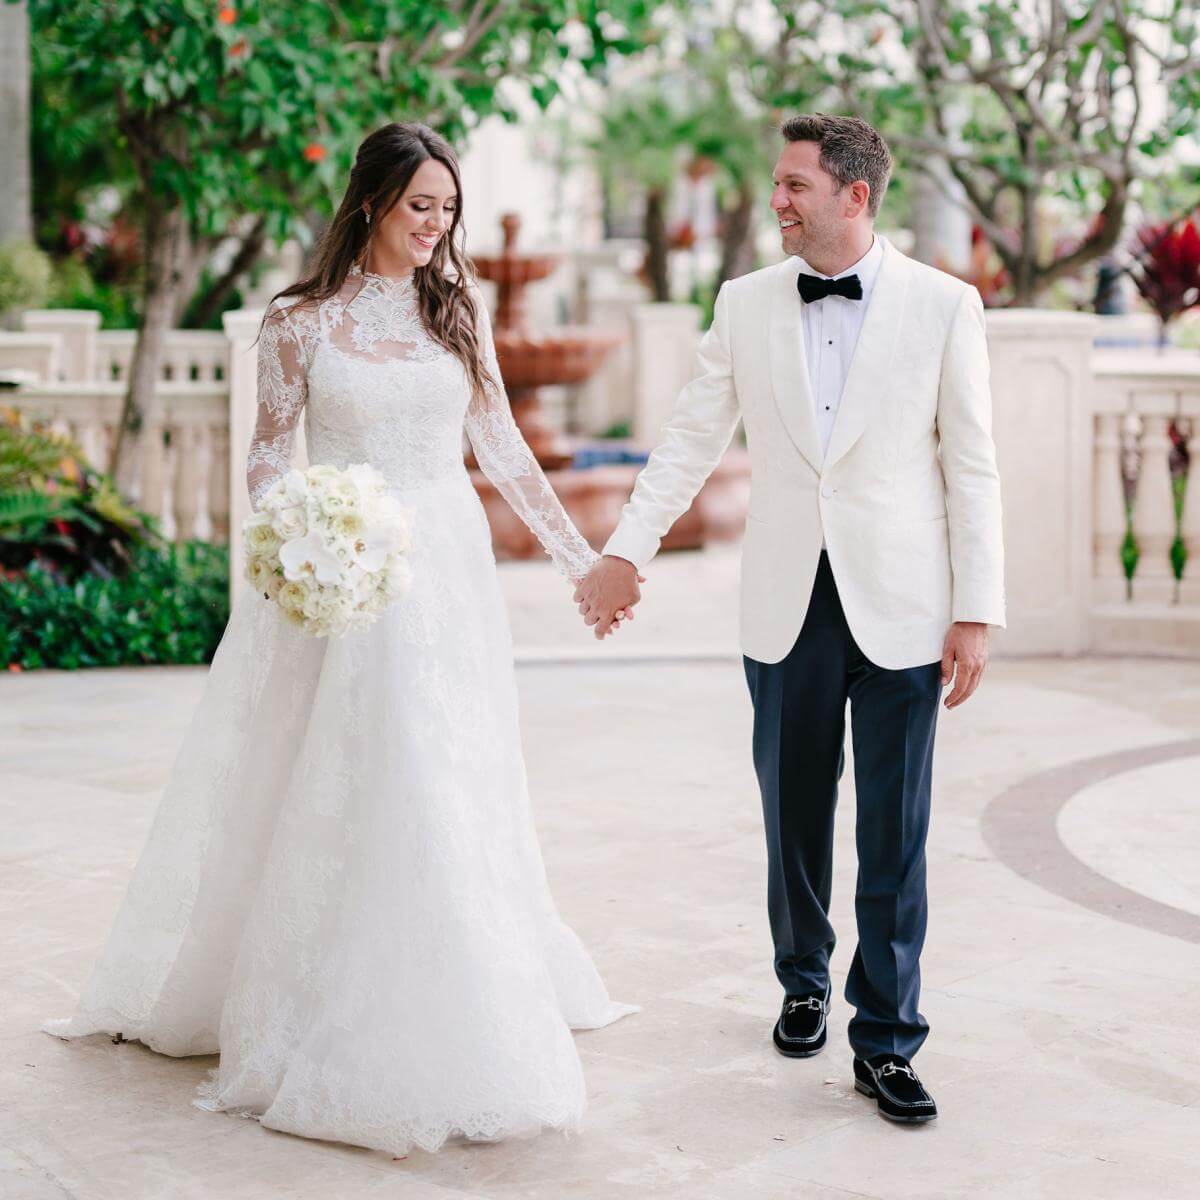 Couple getting married at The Boca Raton 